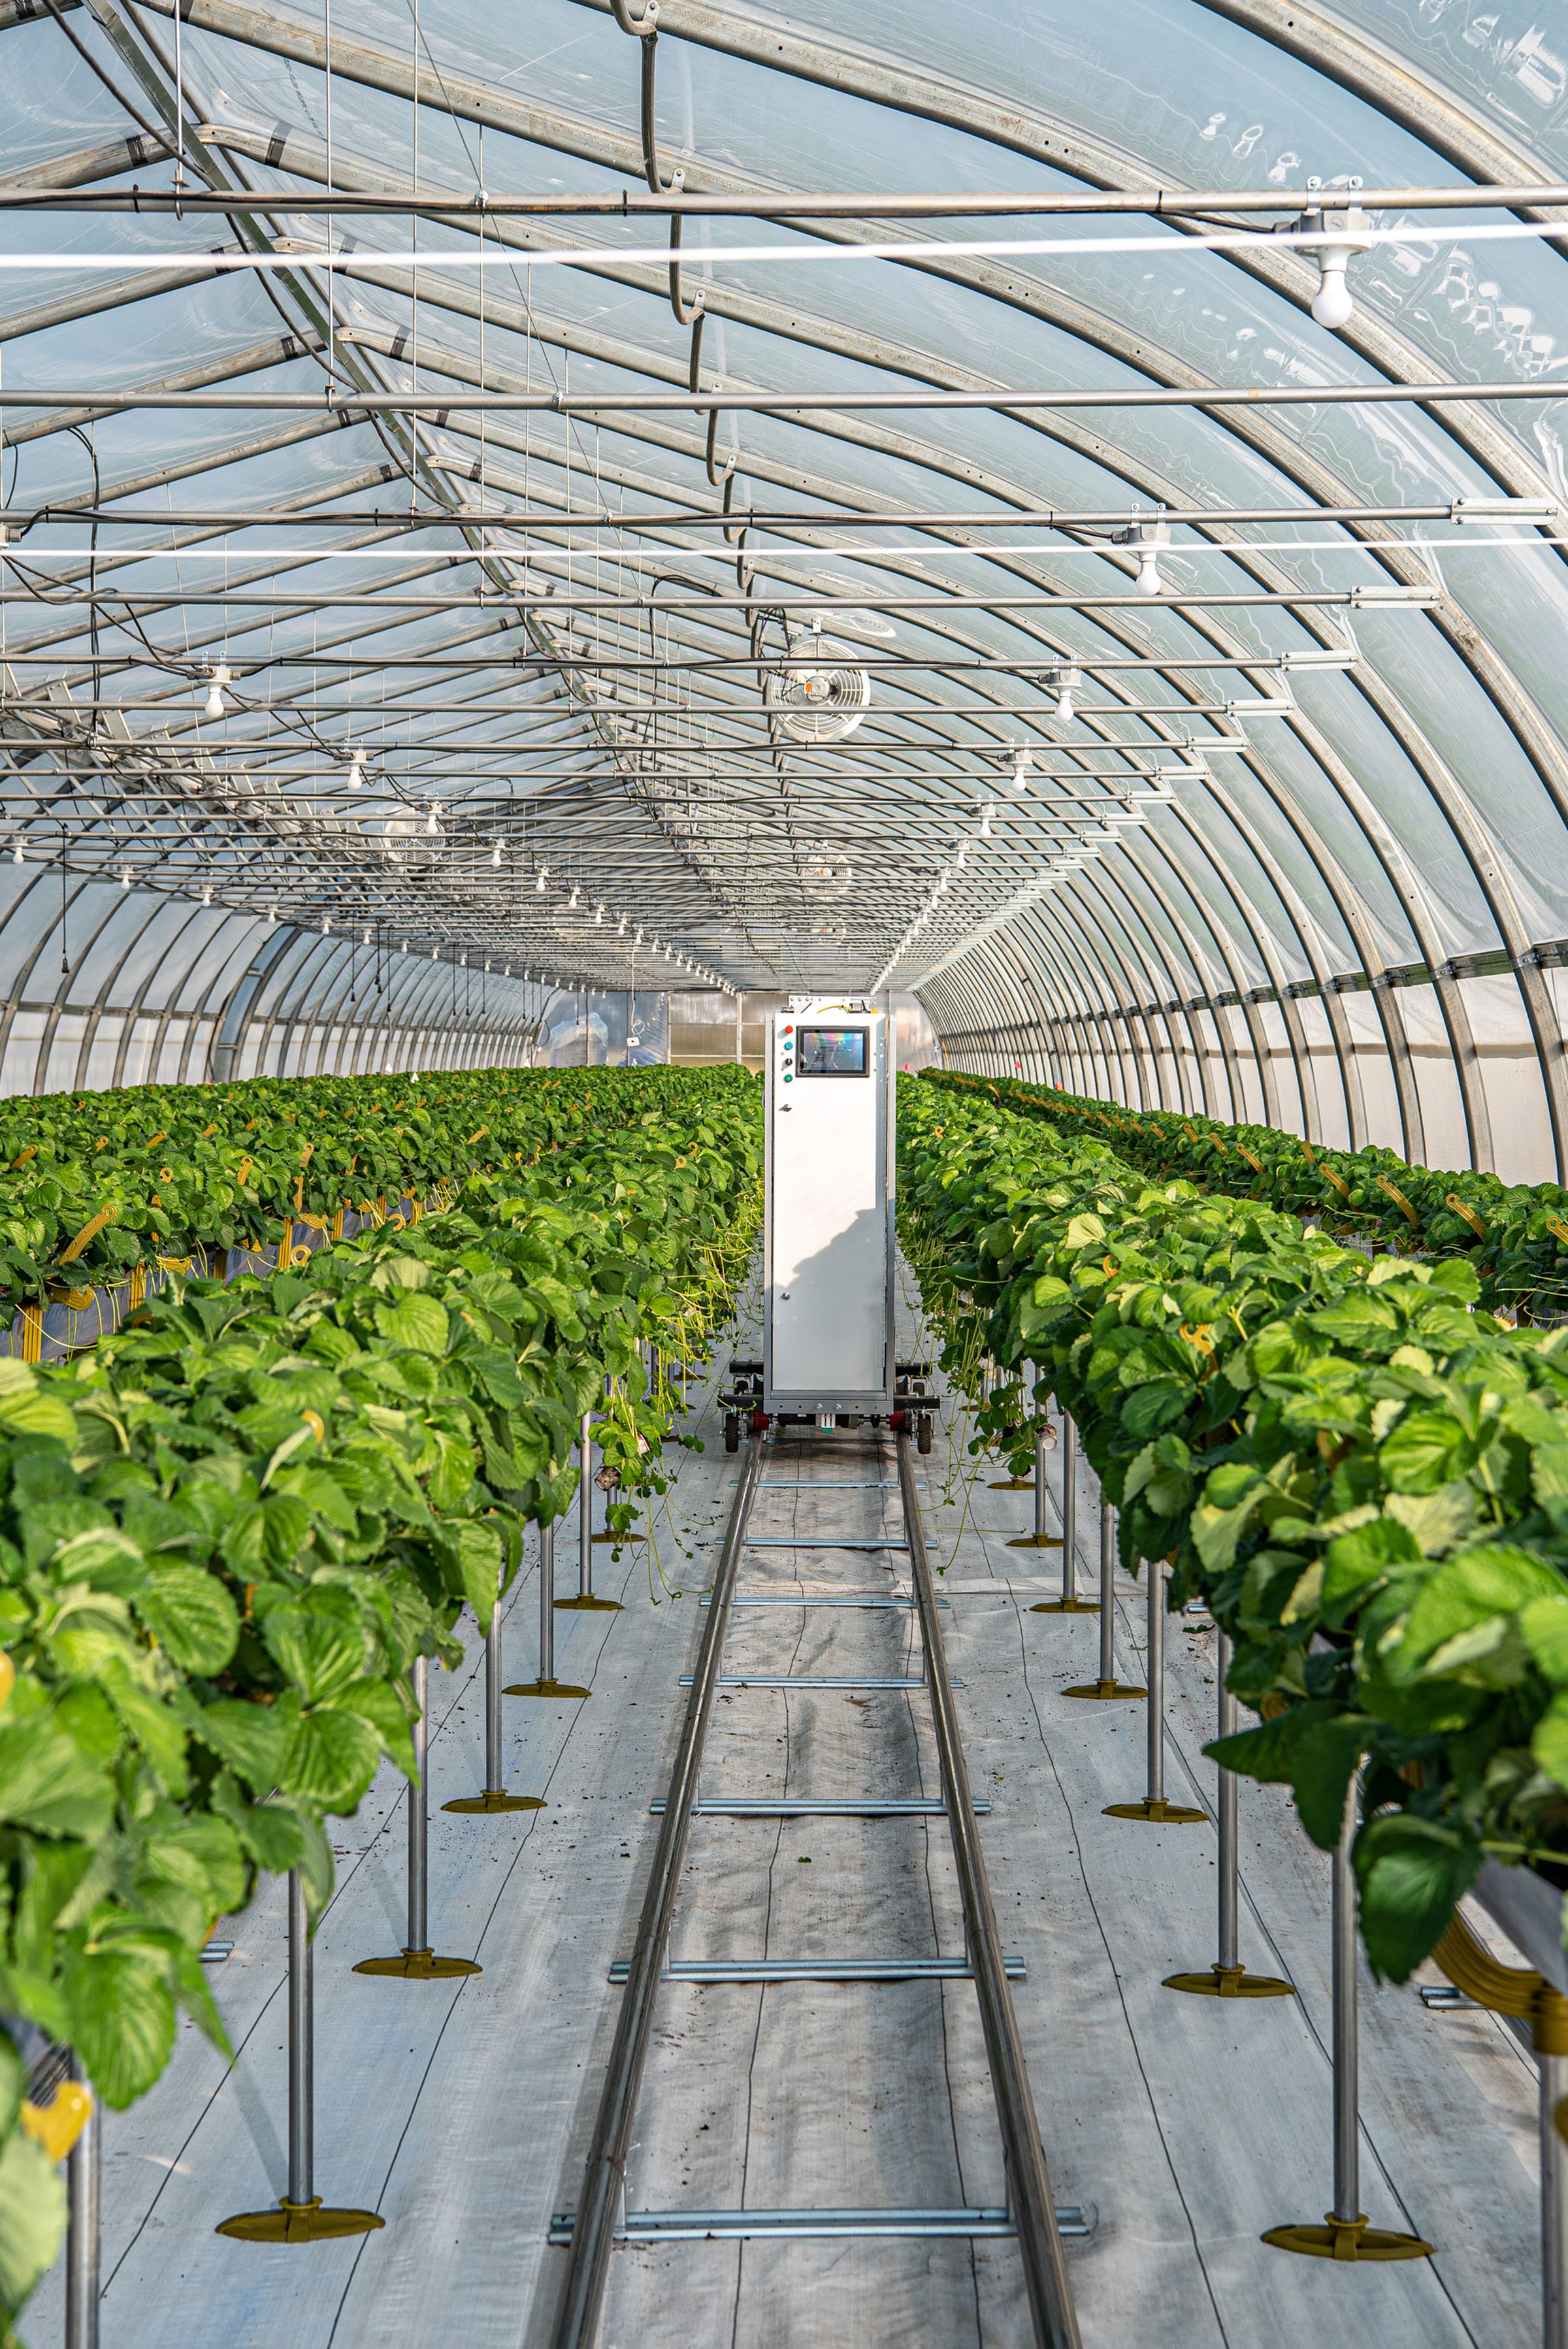 A view between rows of green plants in the bright interior of a long greenhouse during the day. in between two rows is a tall rectangular robot. with a small screen at the top.